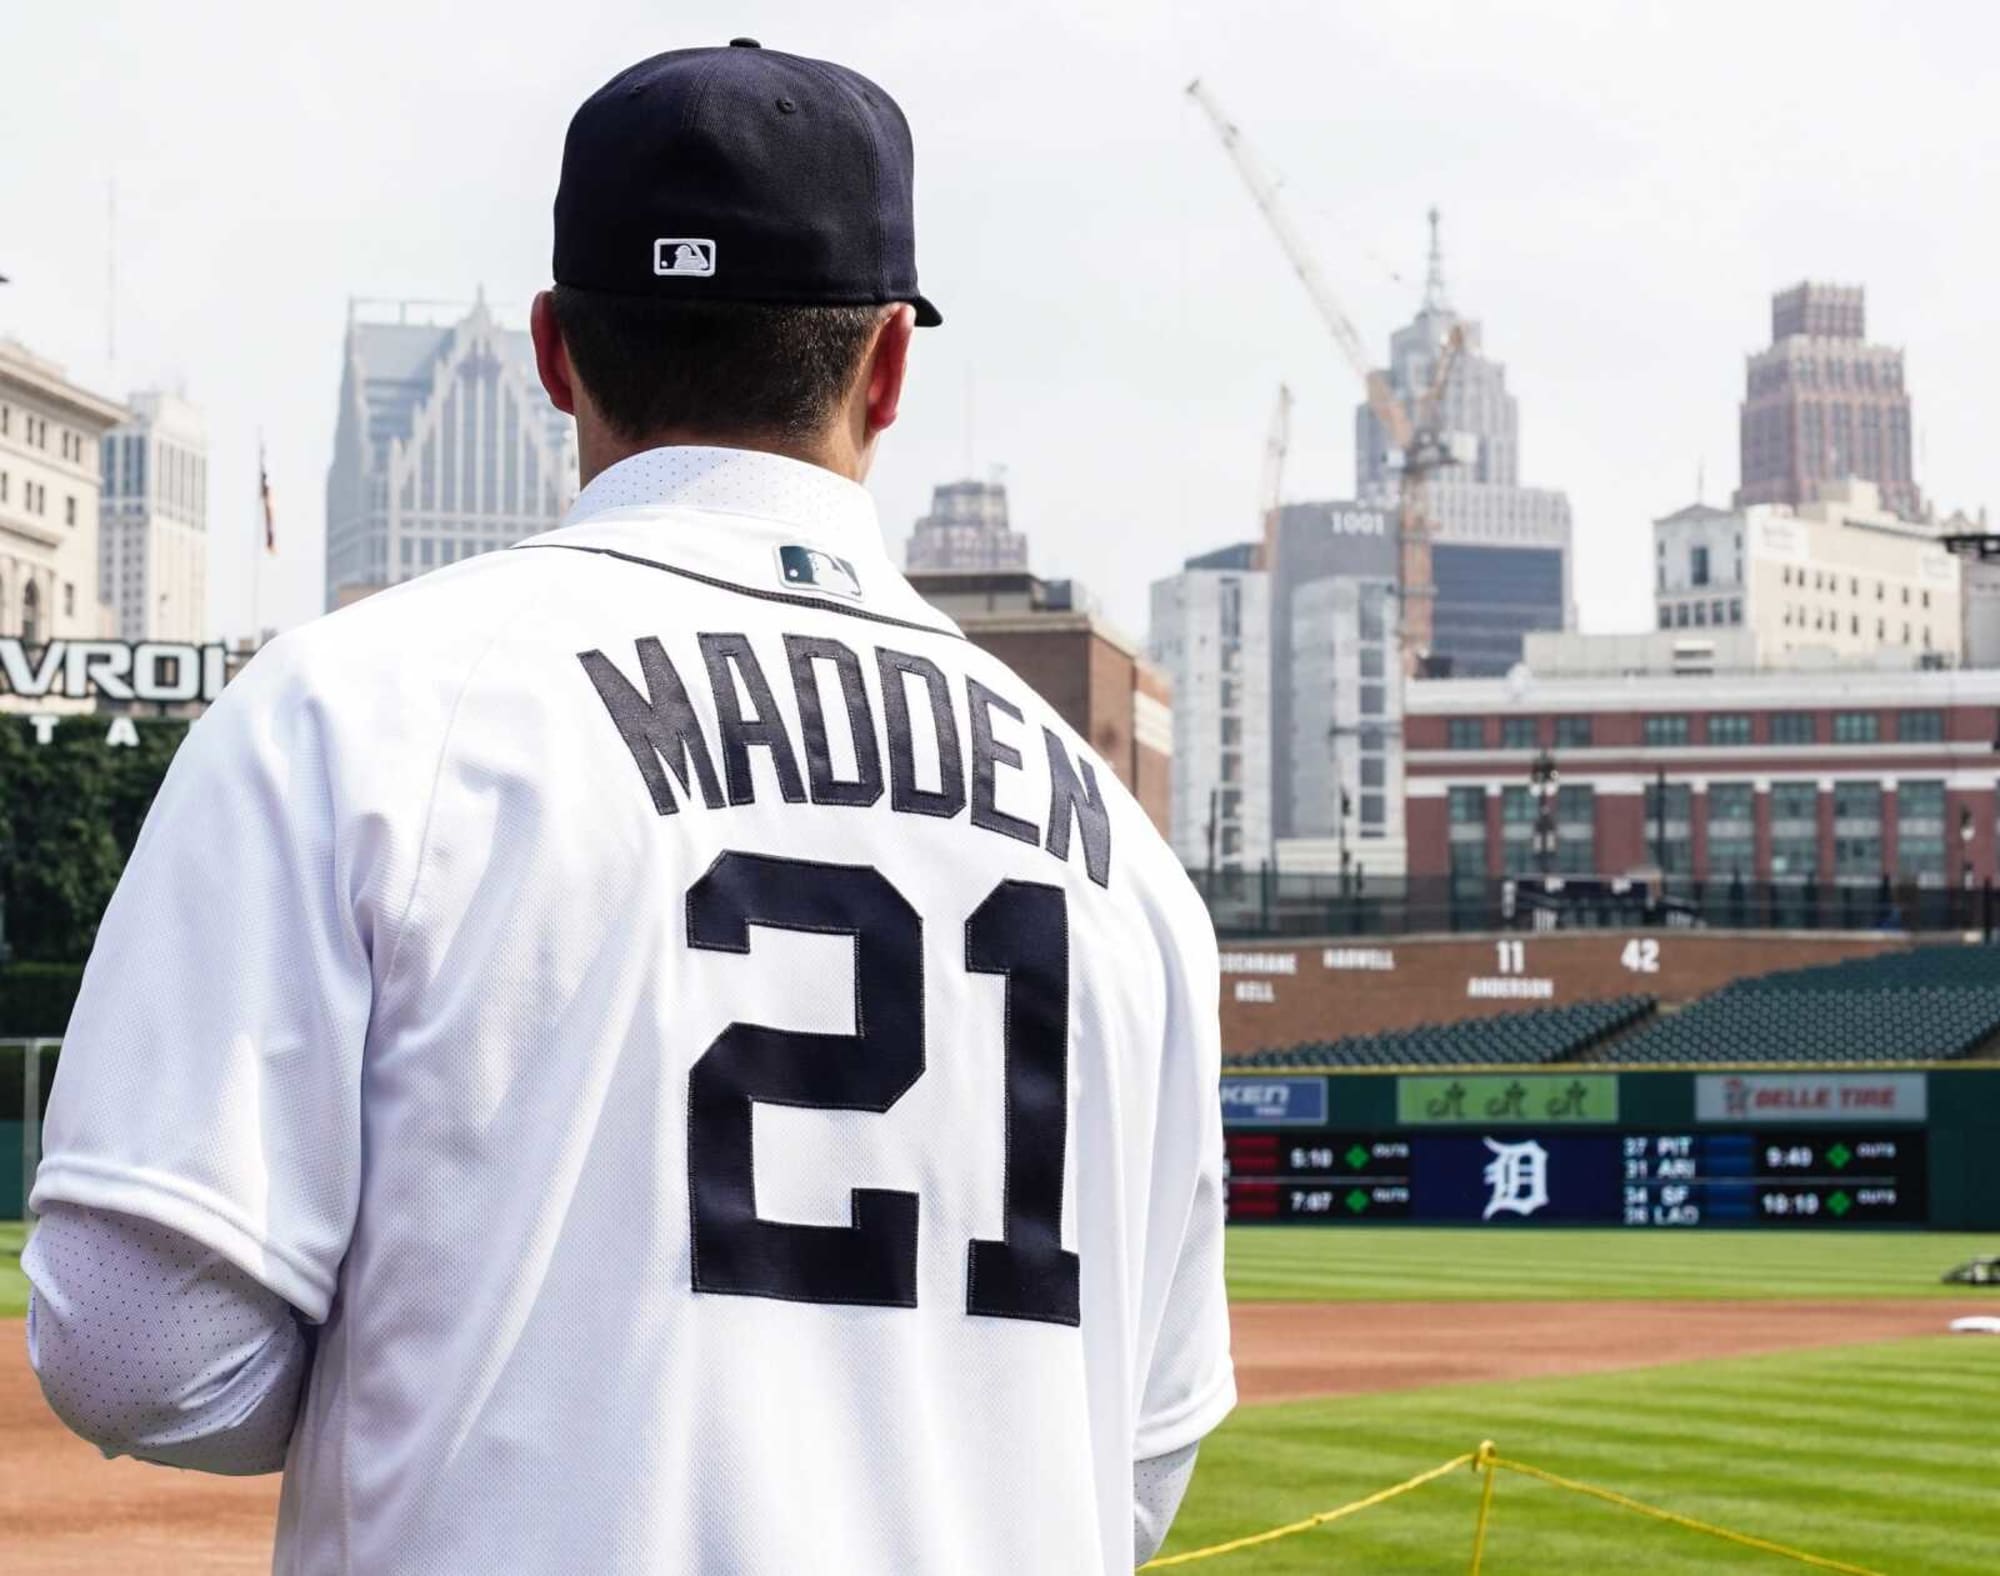 Detroit Tigers prospect pitcher Ty Madden has a bright future